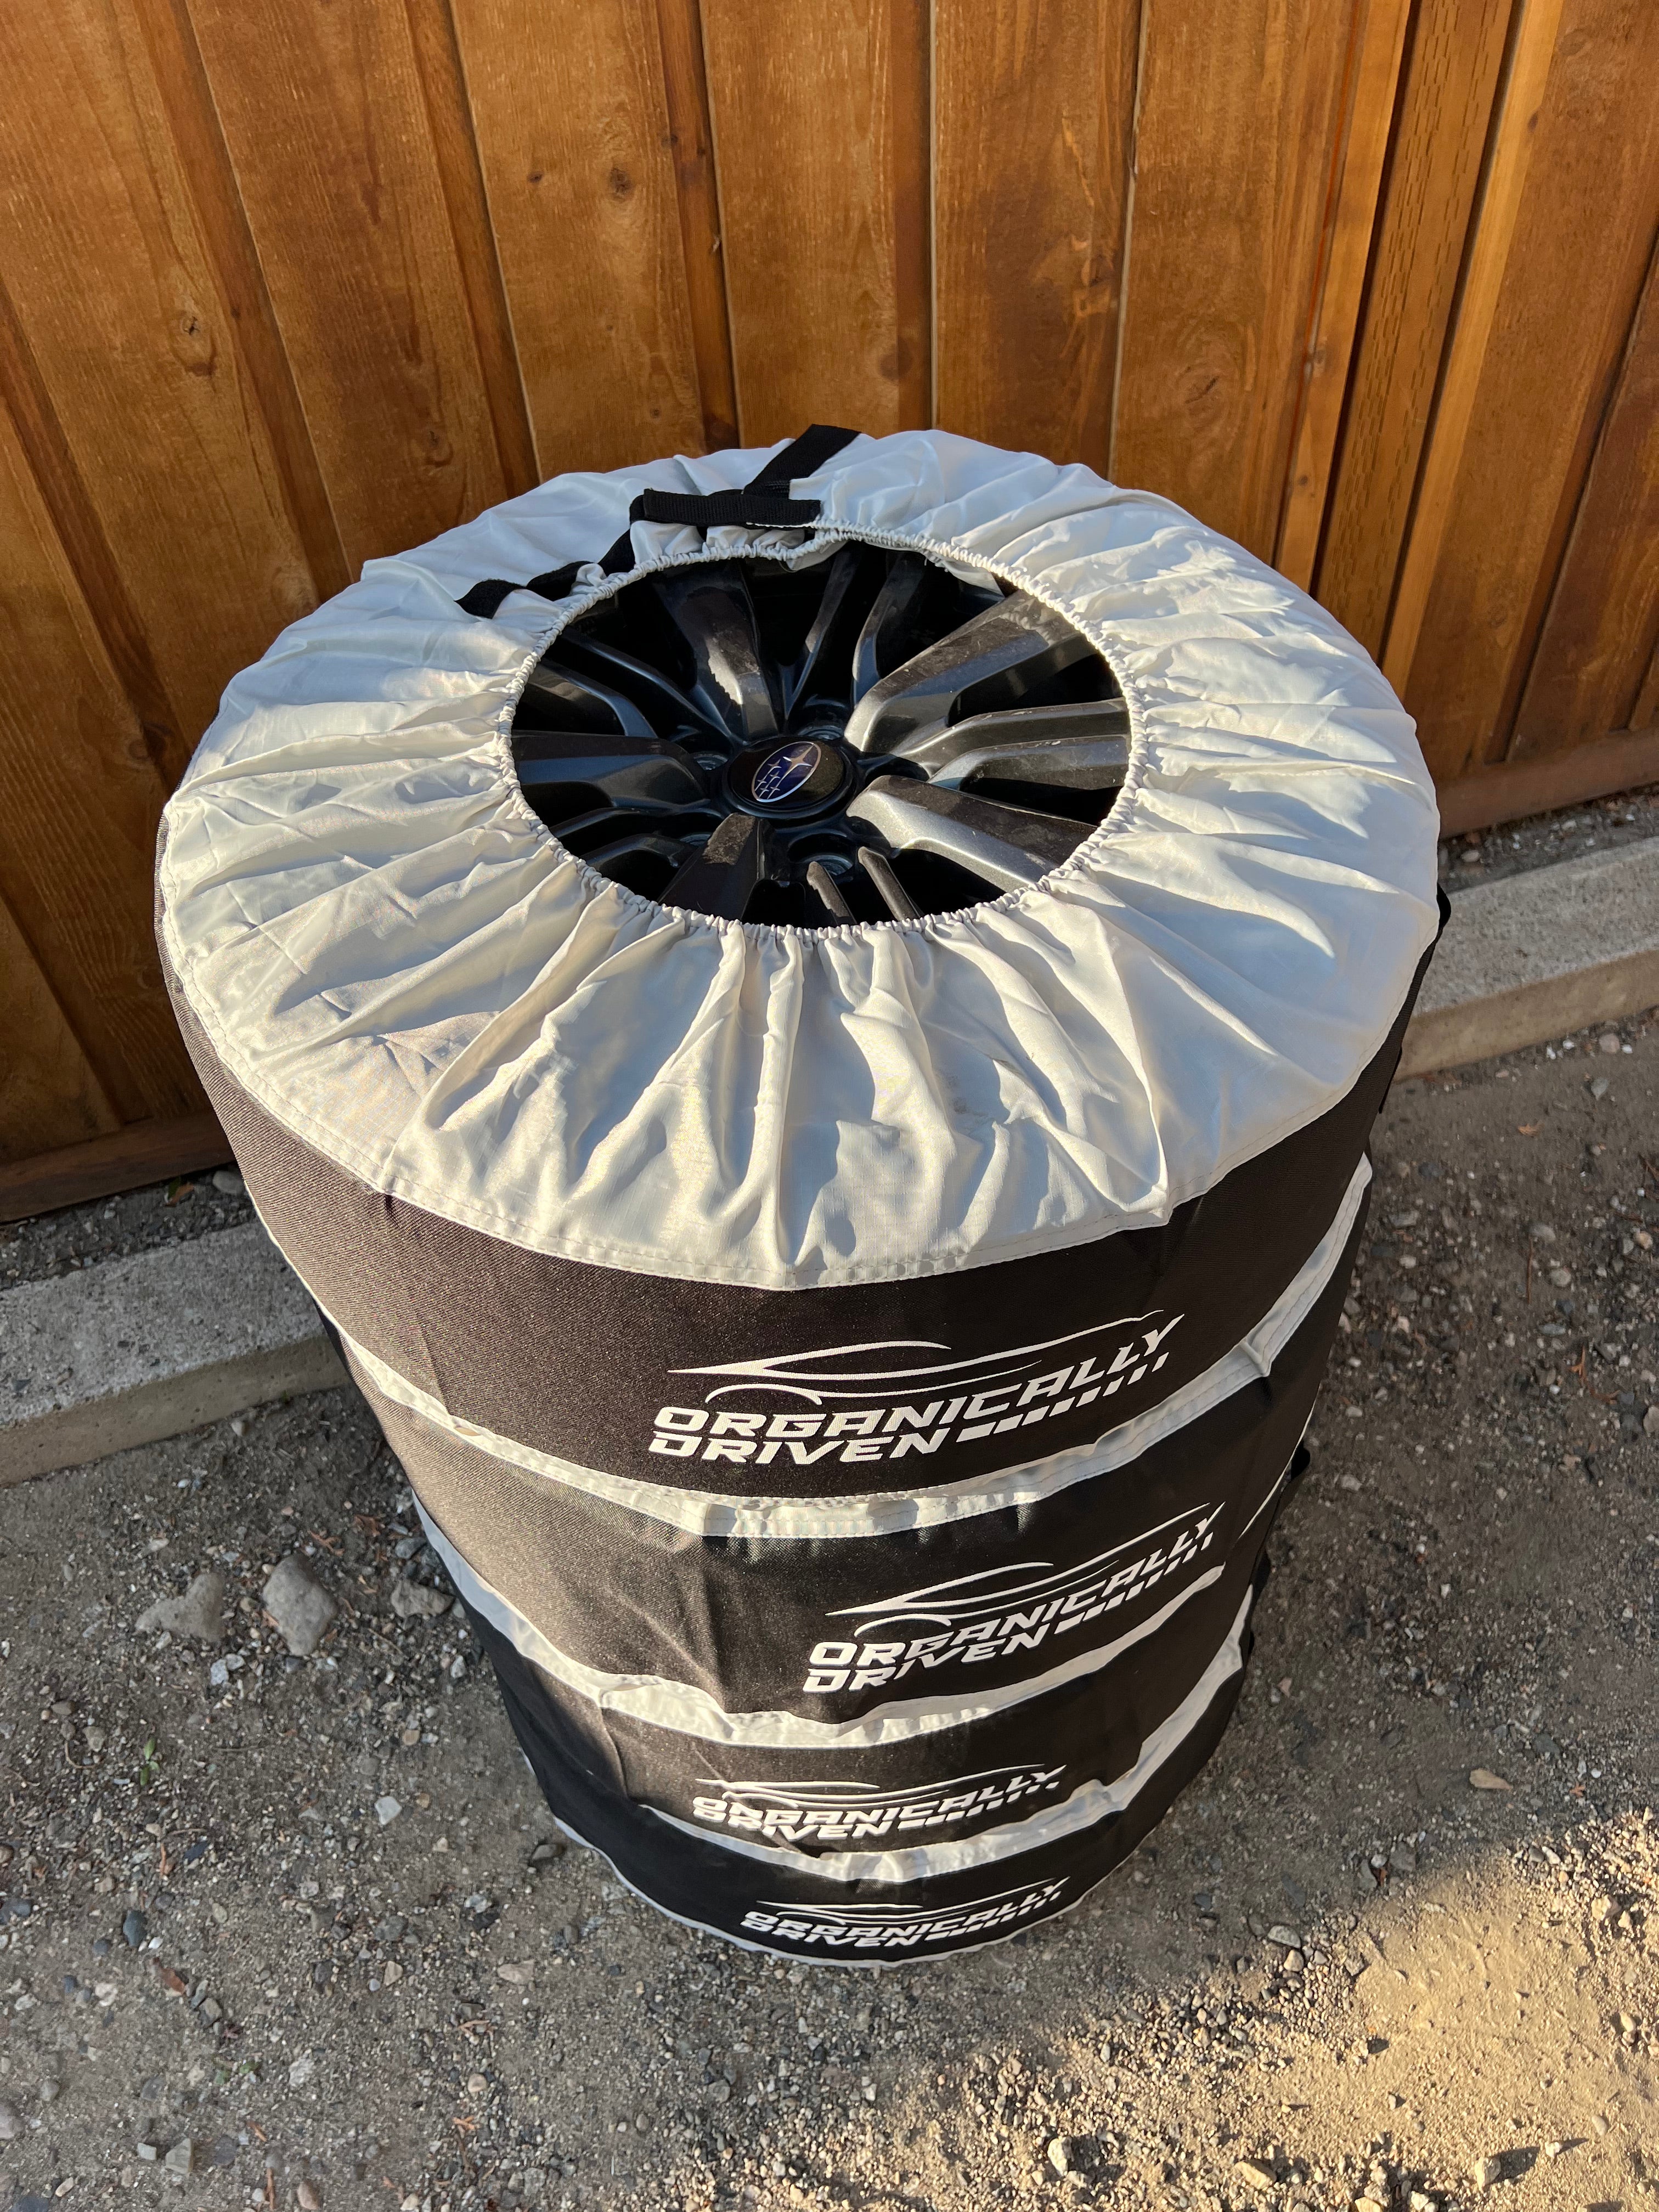 Tire Totes (One Size Fits All) Organically Driven